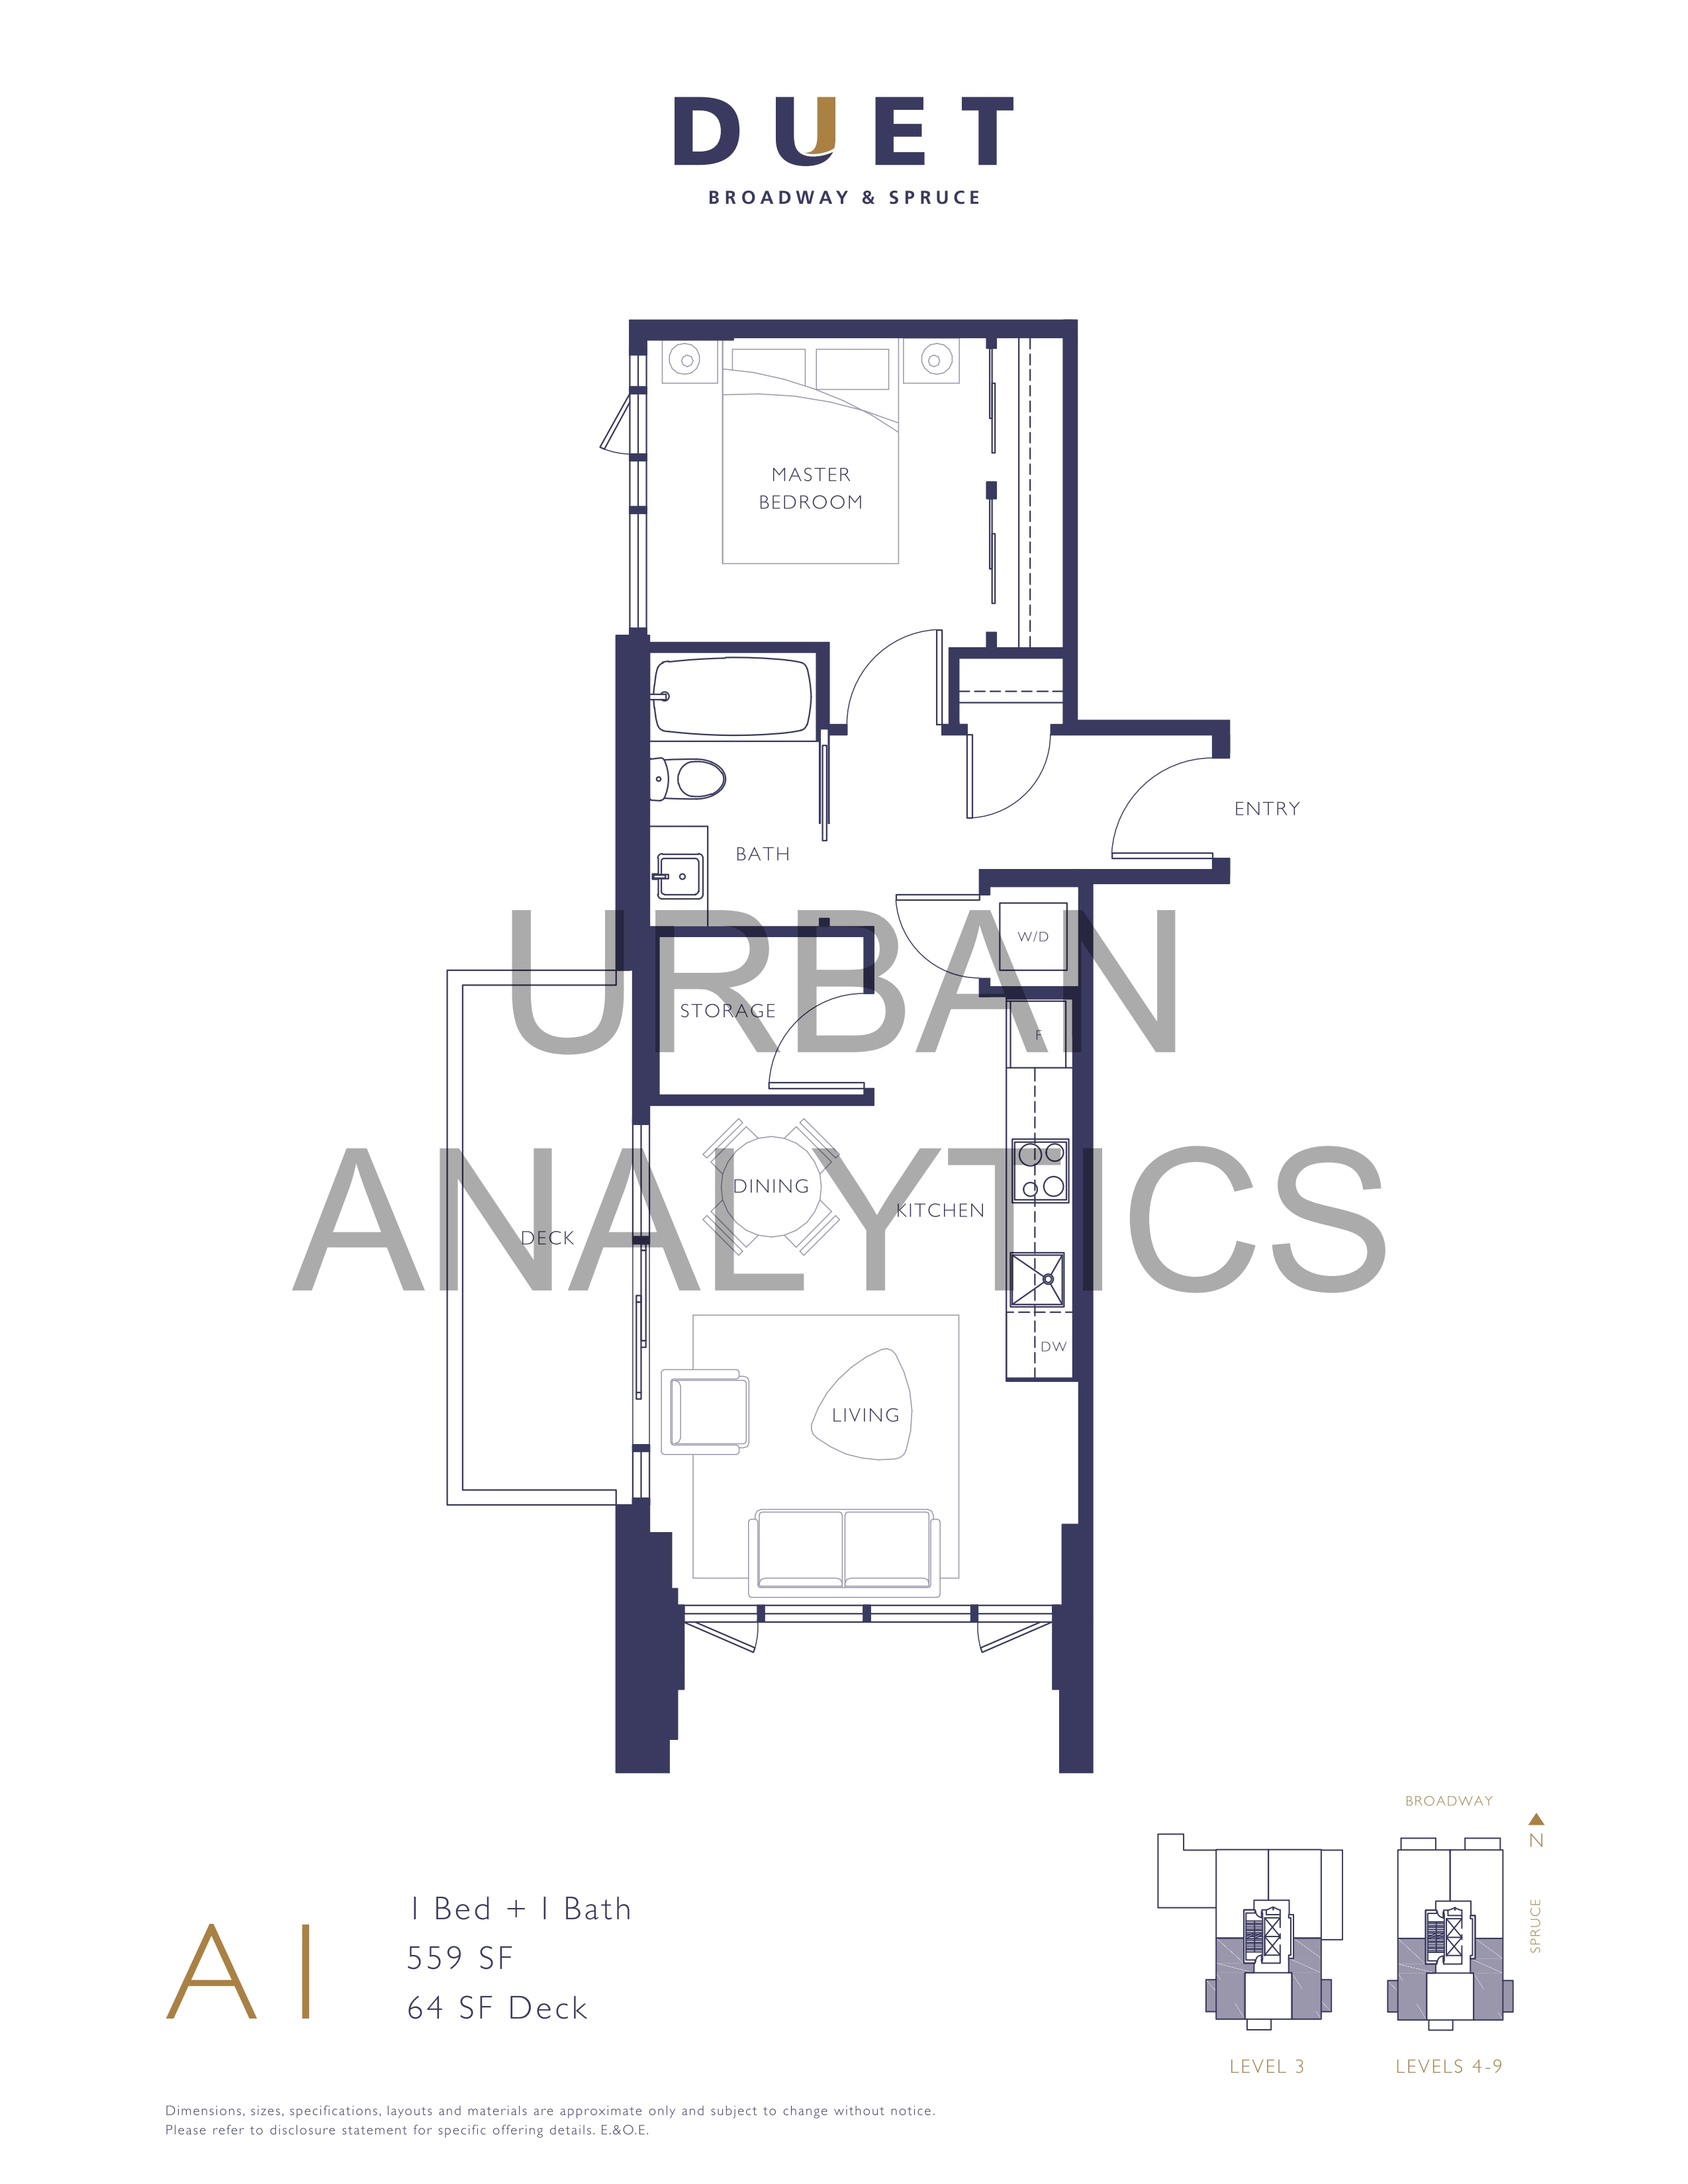 505 Floor Plan of Duet Condos with undefined beds